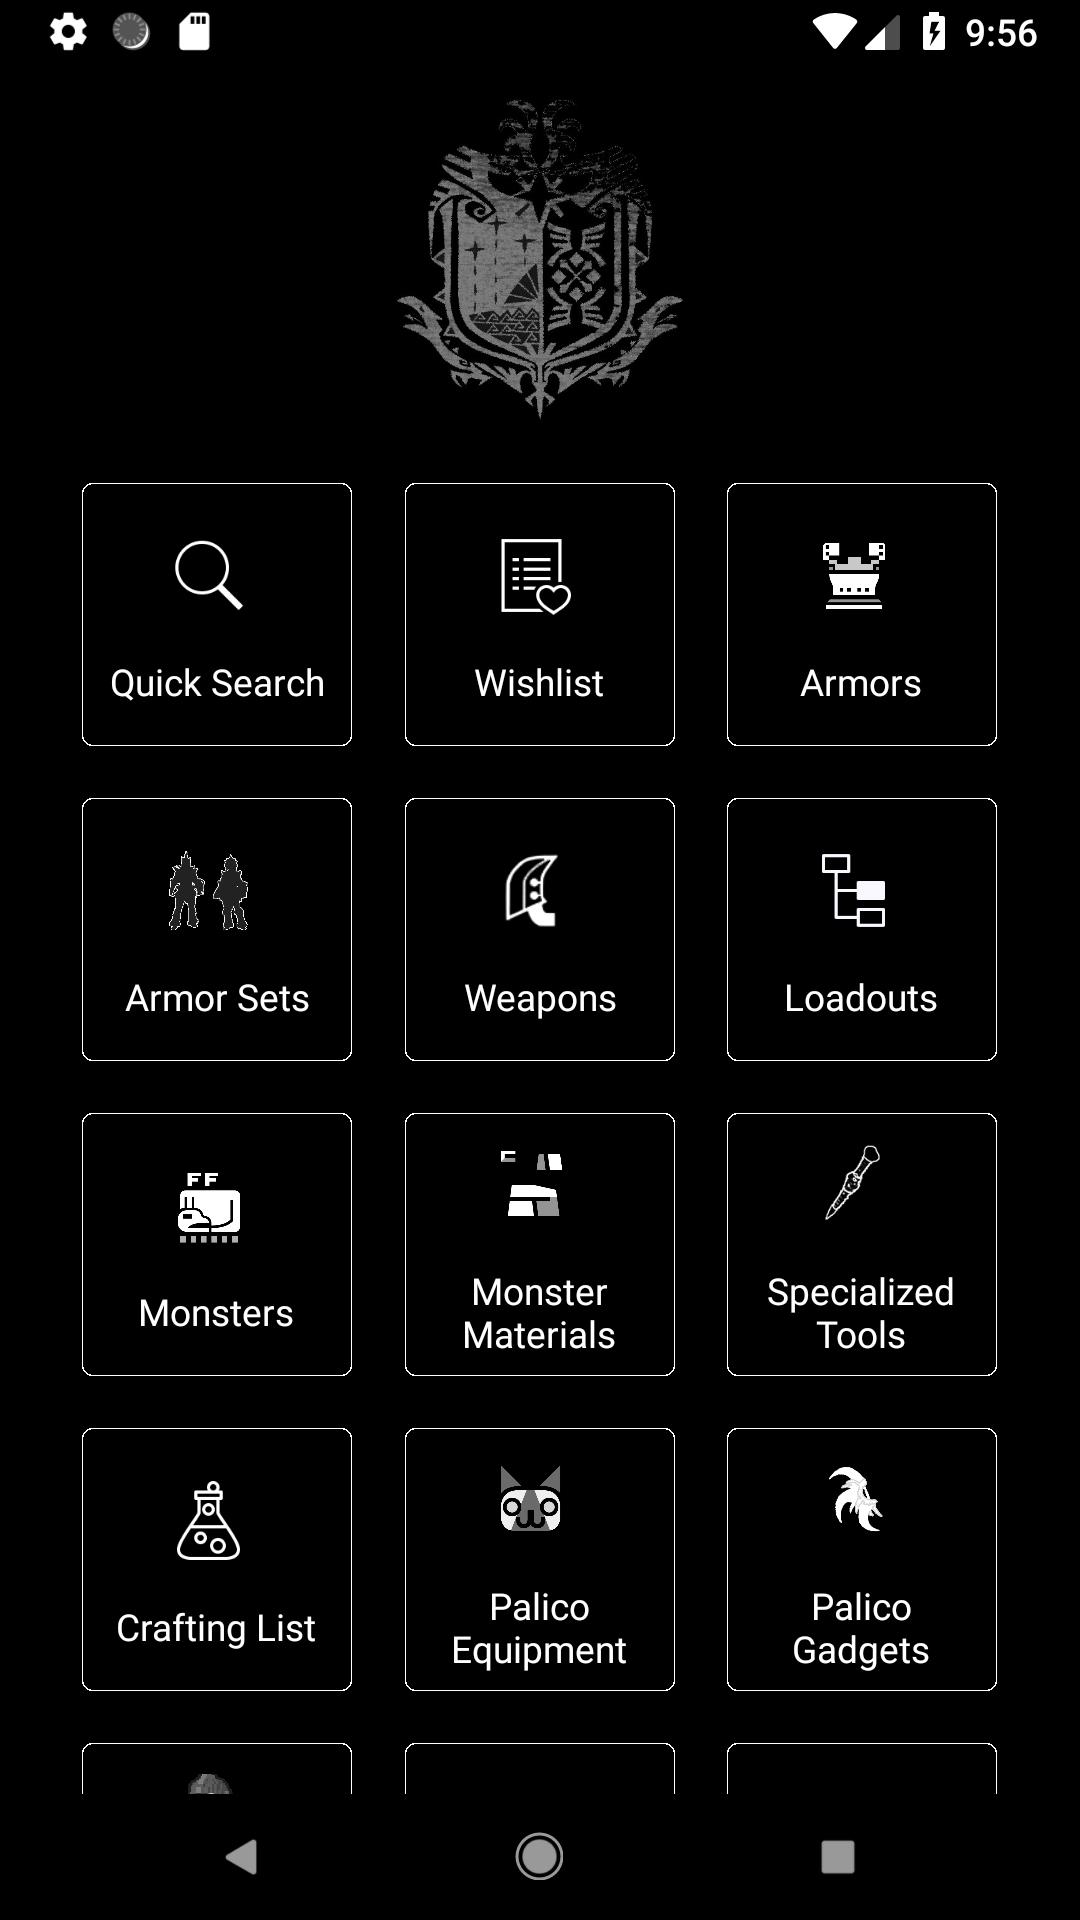 Mhw Guide Wiki Companion For Android Apk Download